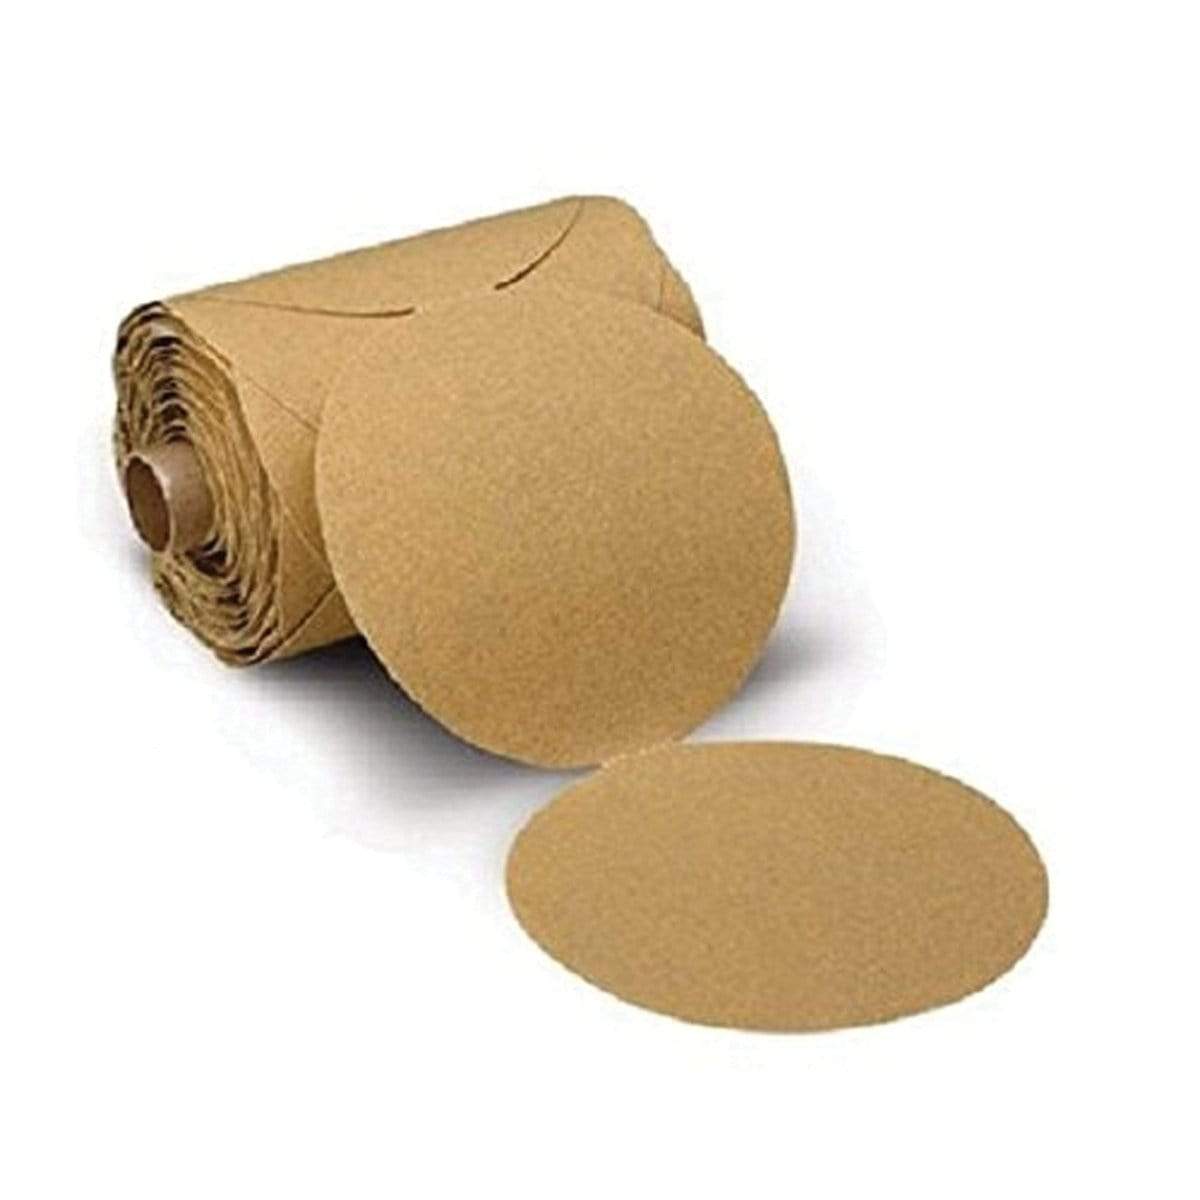 3M Marine Qualifies for Free Shipping 3M Stikit Paper Disc Roll 236u 6" Nh P80 C-Weight 100-pc #55560